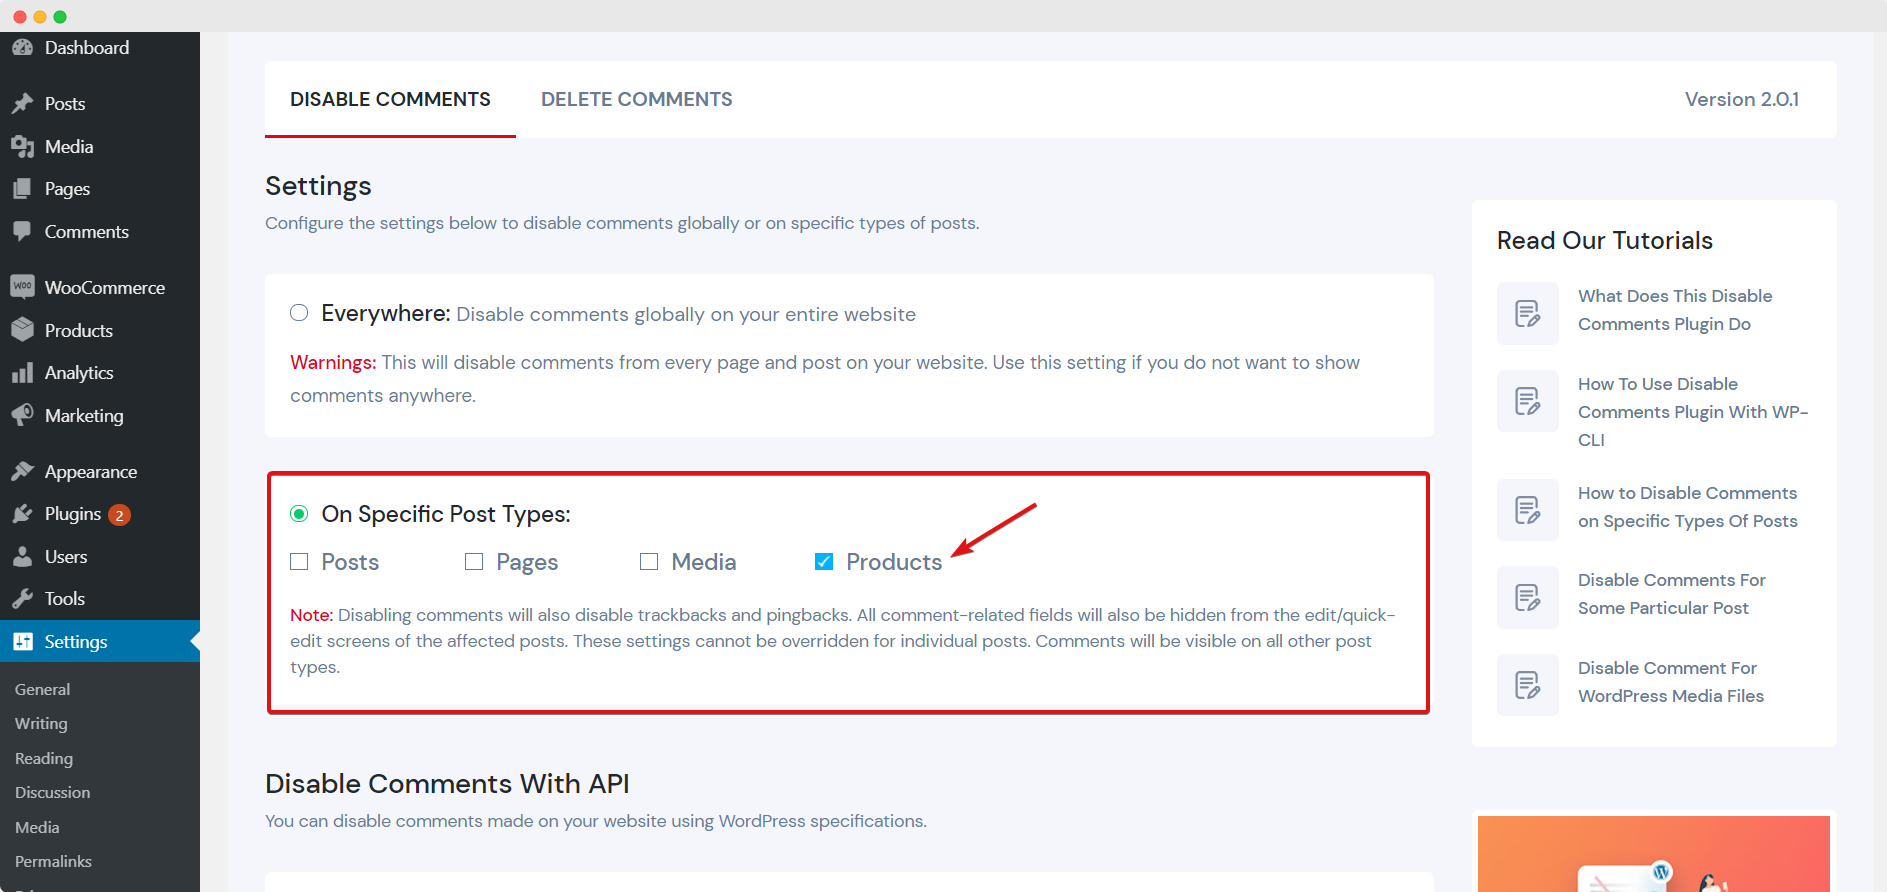 WPDeveloper Acquired Disable Comments WordPress Plugin With 1 Million+ Users 2